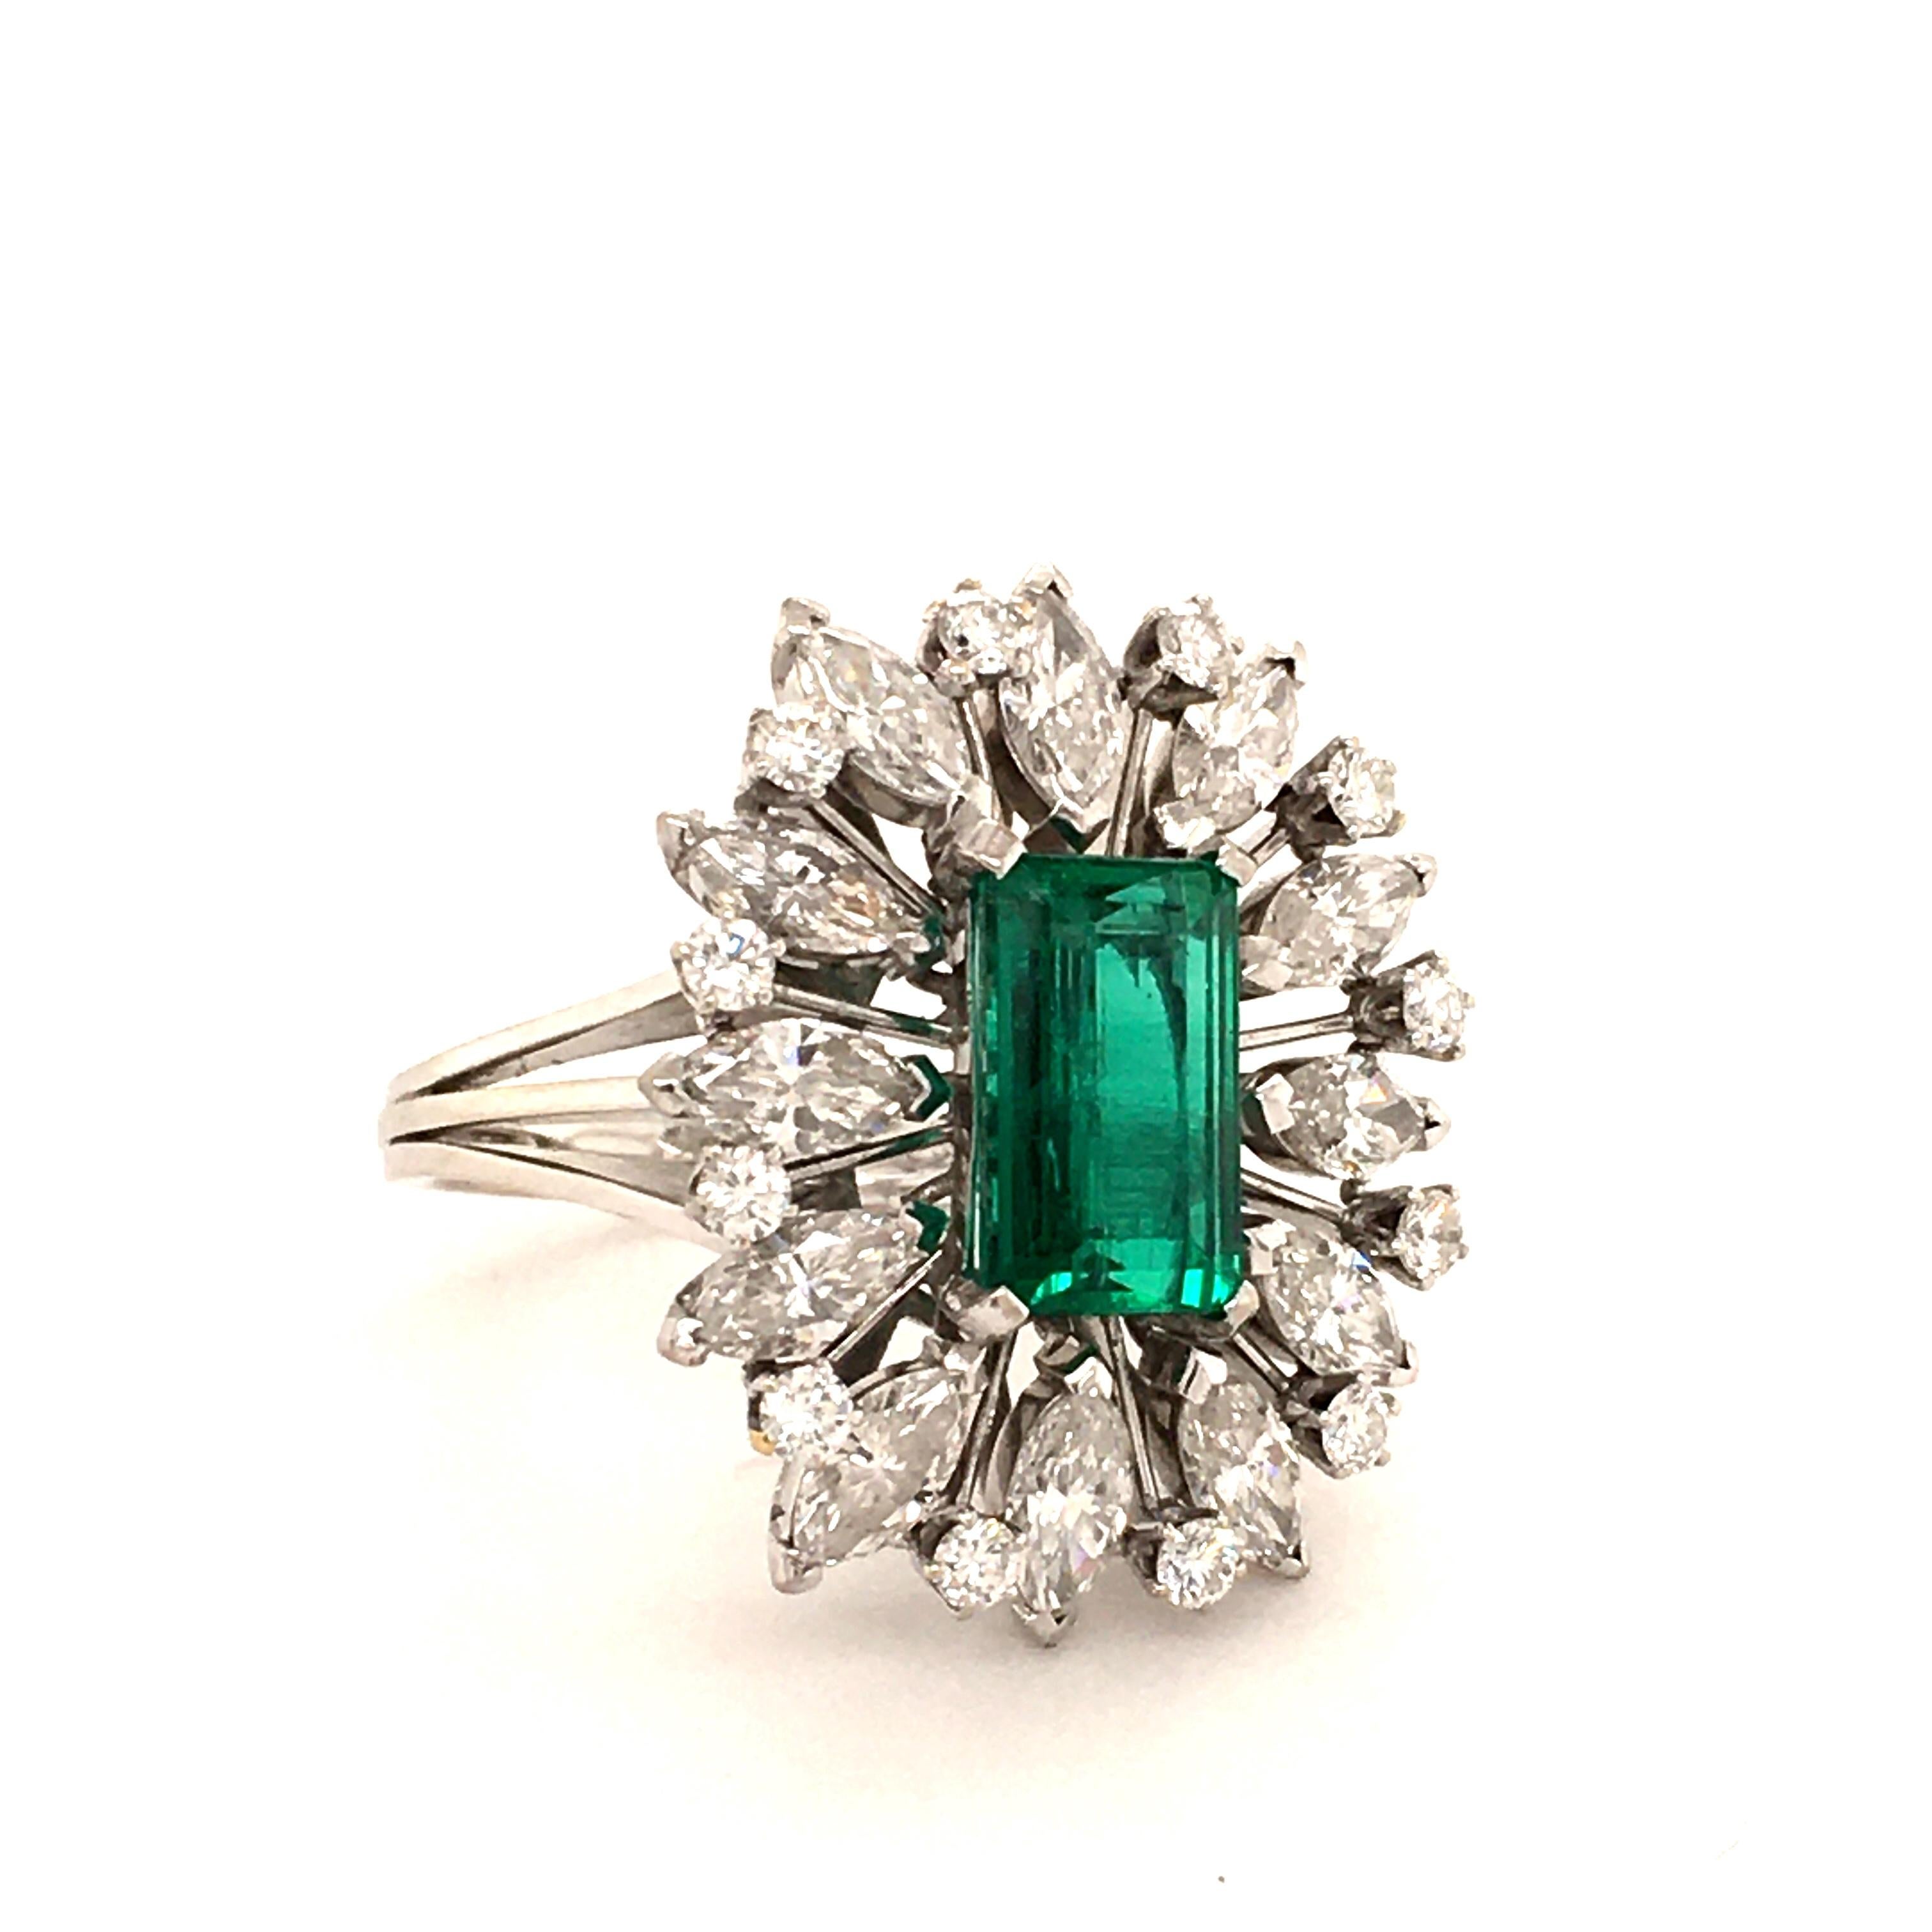 This splendid ring features a 2.25 carat Colombian emerald of vibrant colour and very good quality. Surrounded by 12 marquise-cut and 12 brilliant-cut diamonds of G/H colour and vvs/vs clarity, total weight approximately 3.00 carats.

The emerald is